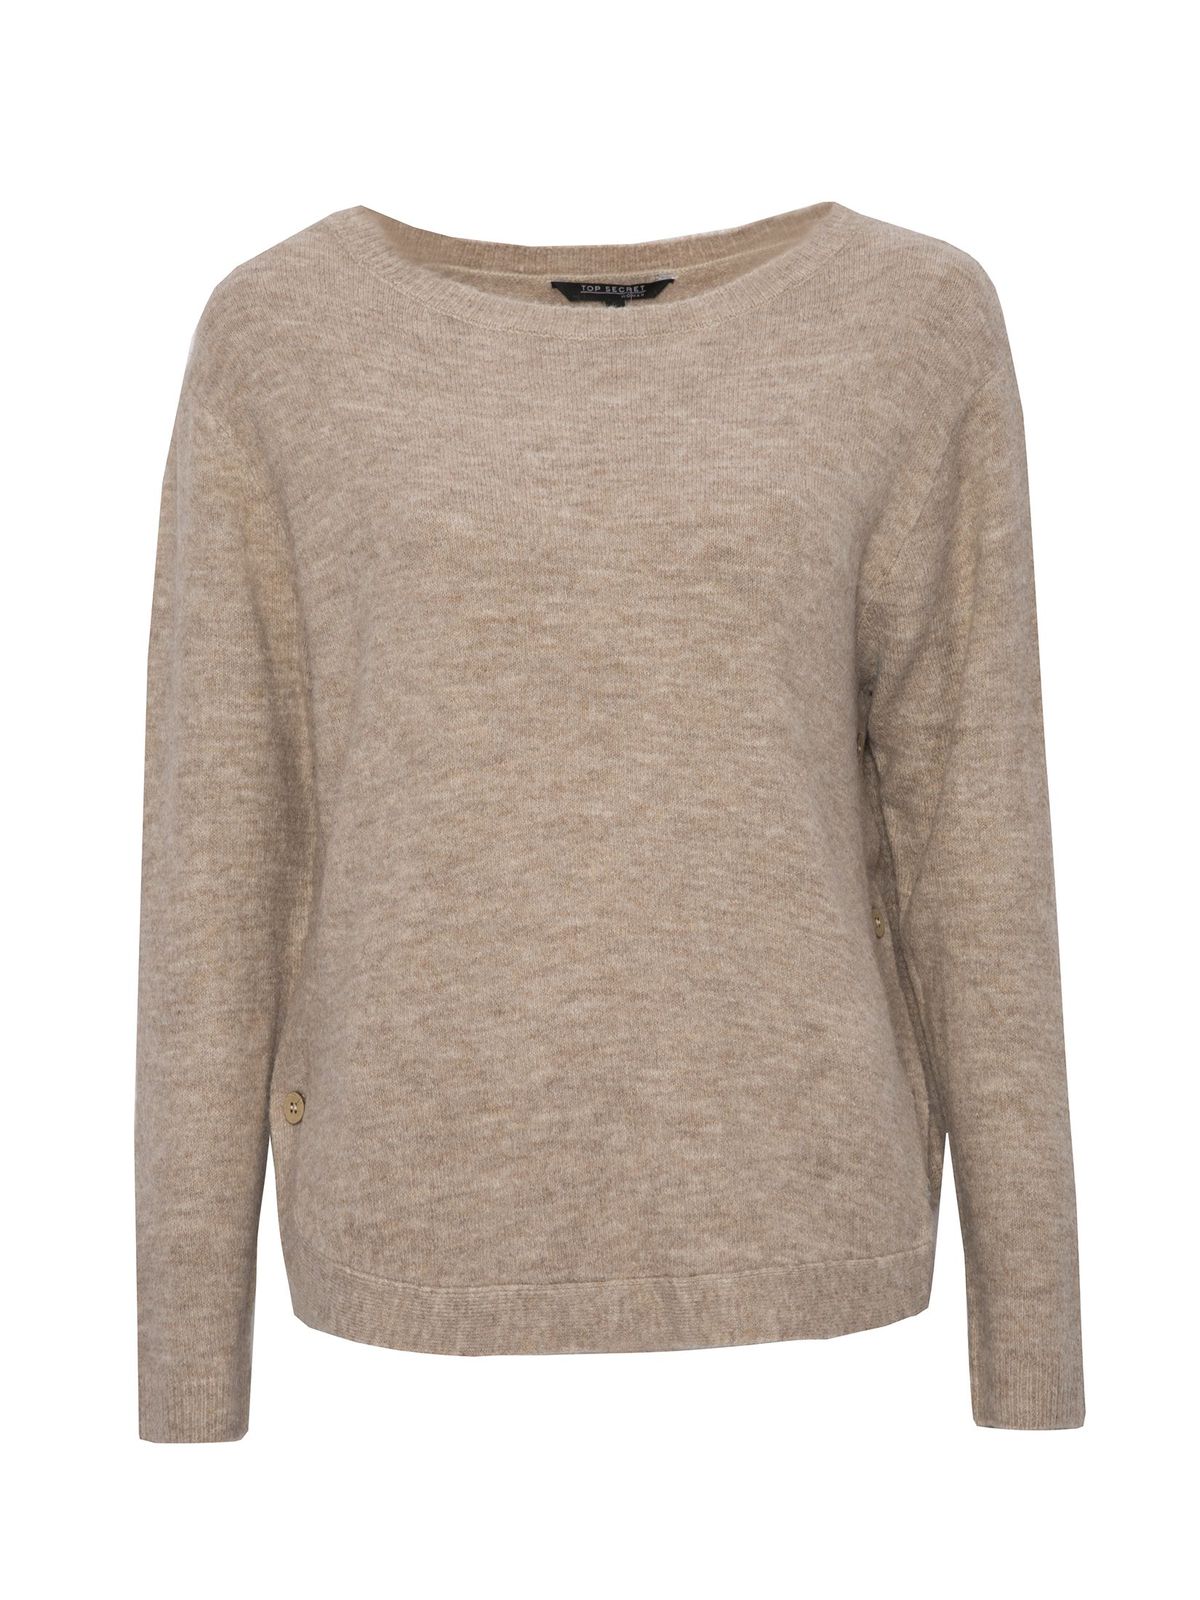 Cream sweater knitted loose fit neckline 5 - StarShinerS.com